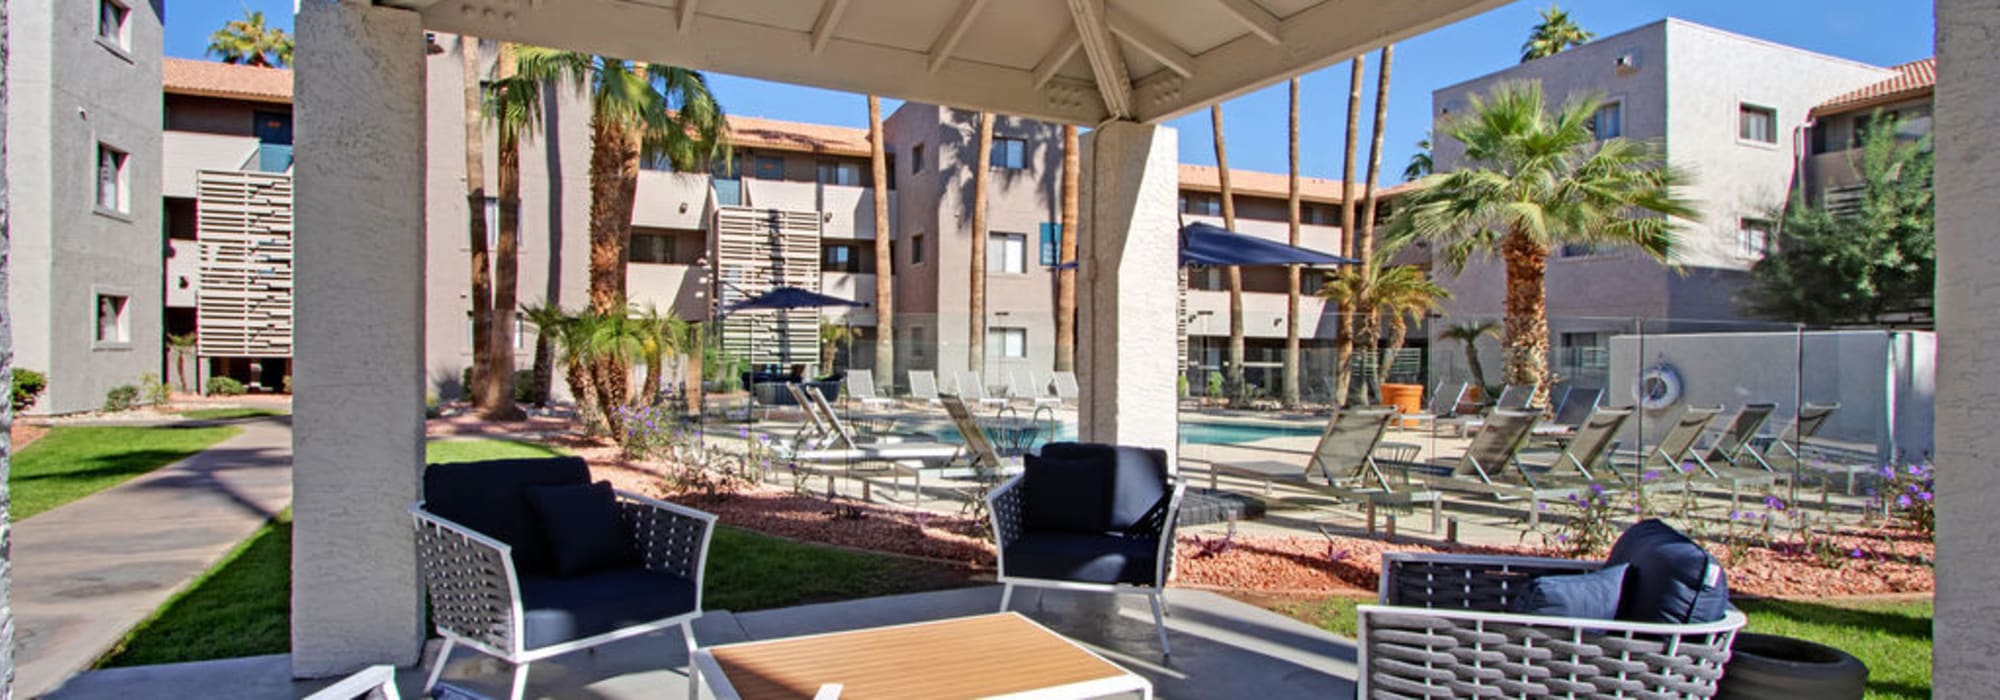 Outdoor covered community area at Riverside Apartments in Tempe, Arizona